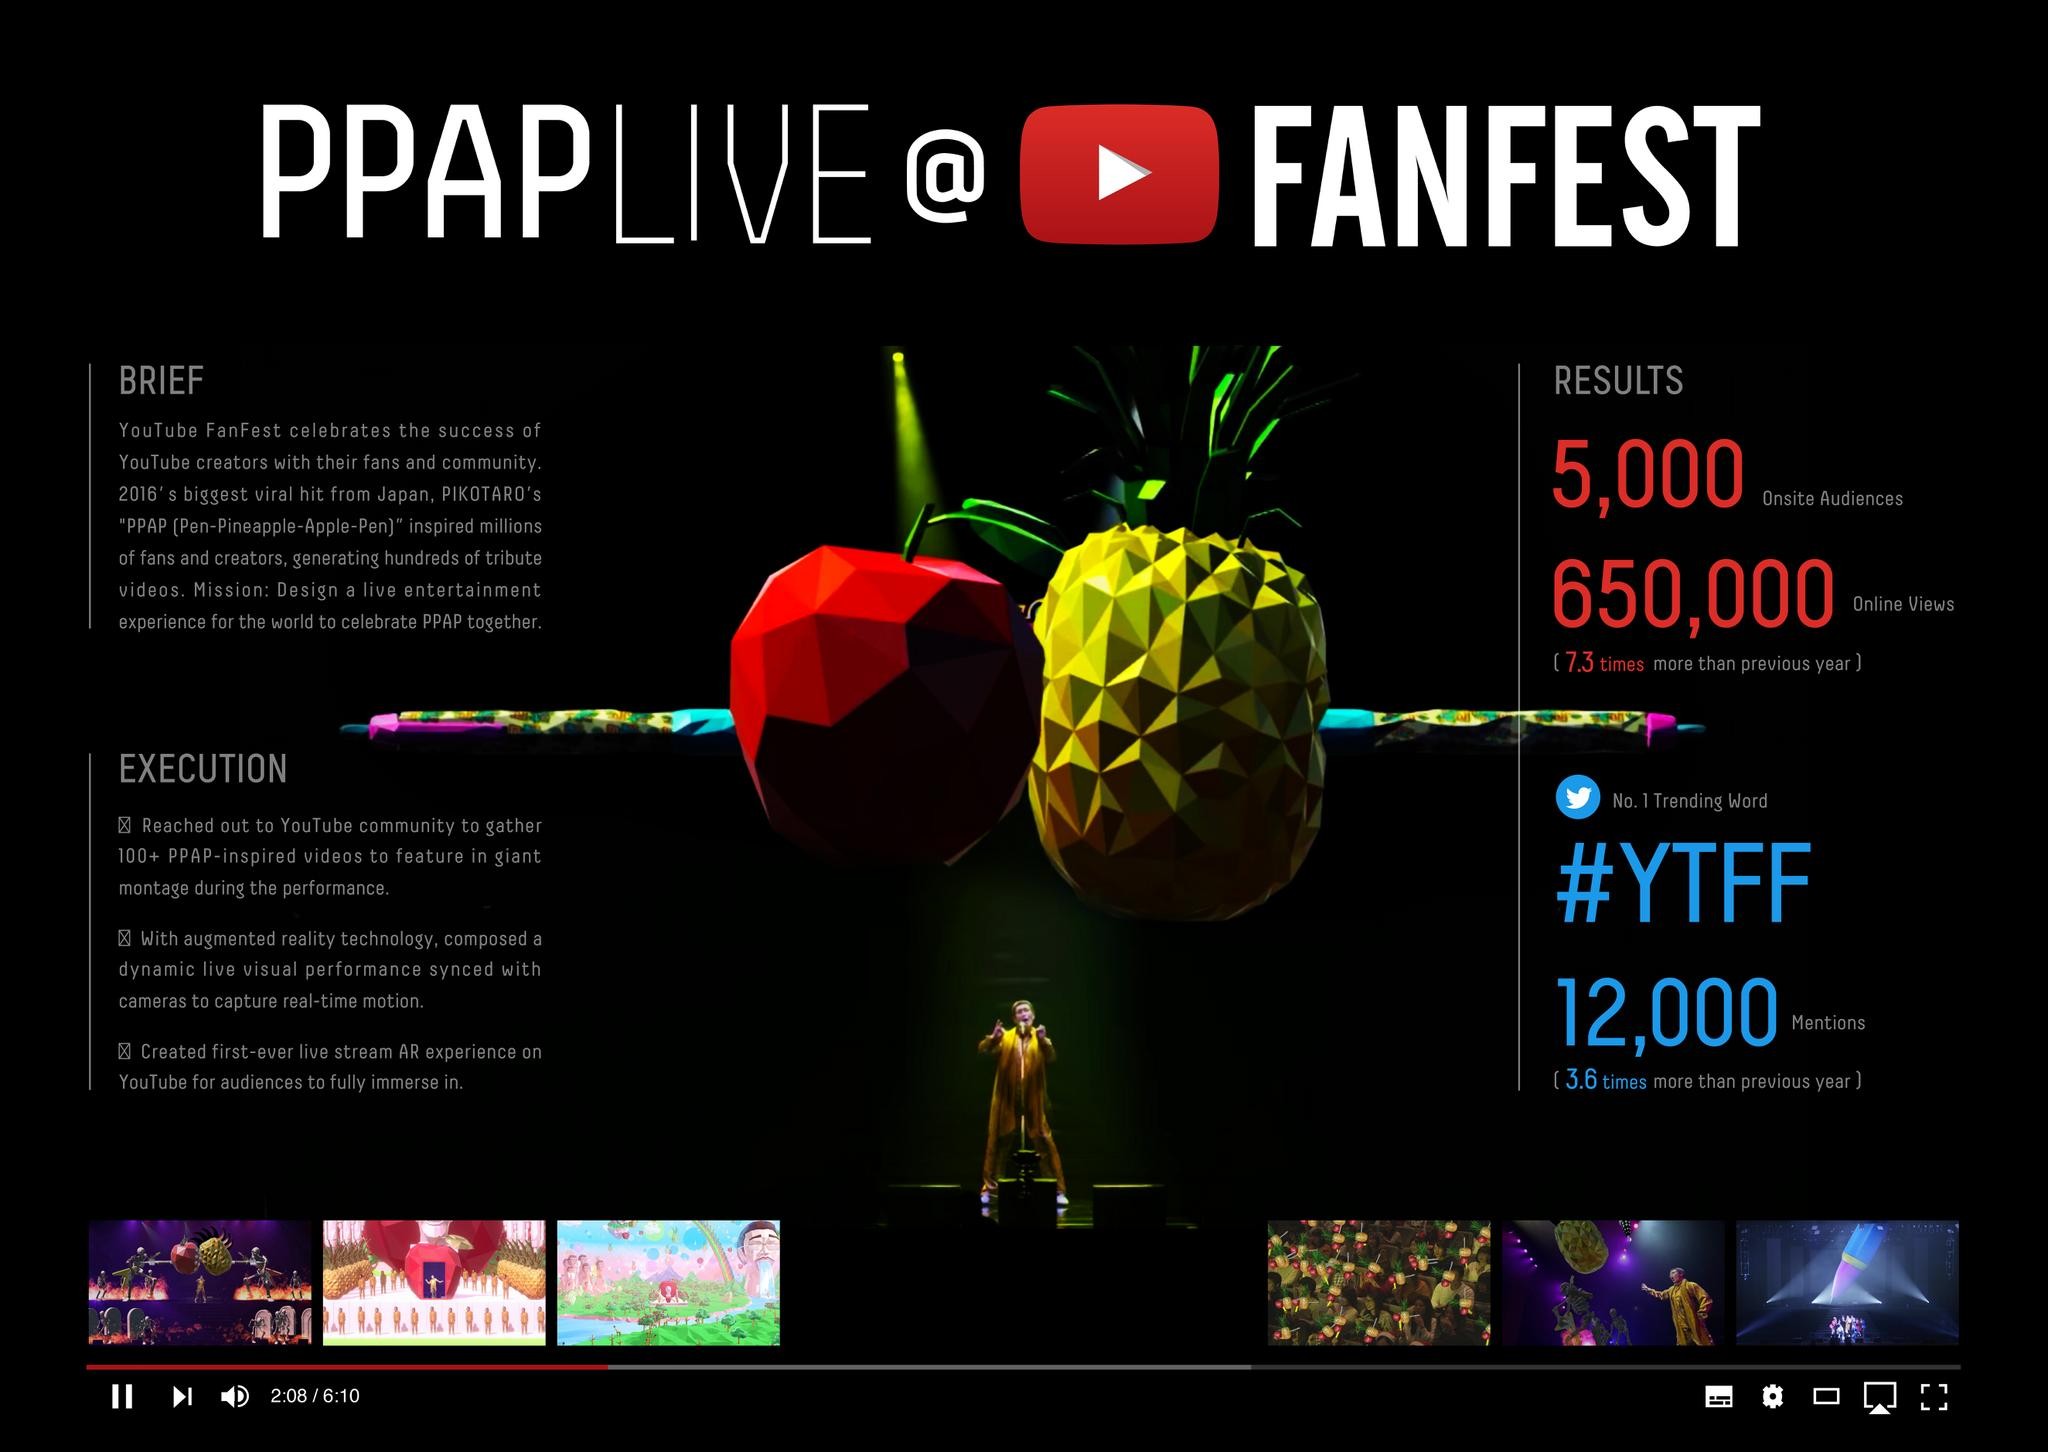 PPAP LIVE @ YOUTUBE FANFEST